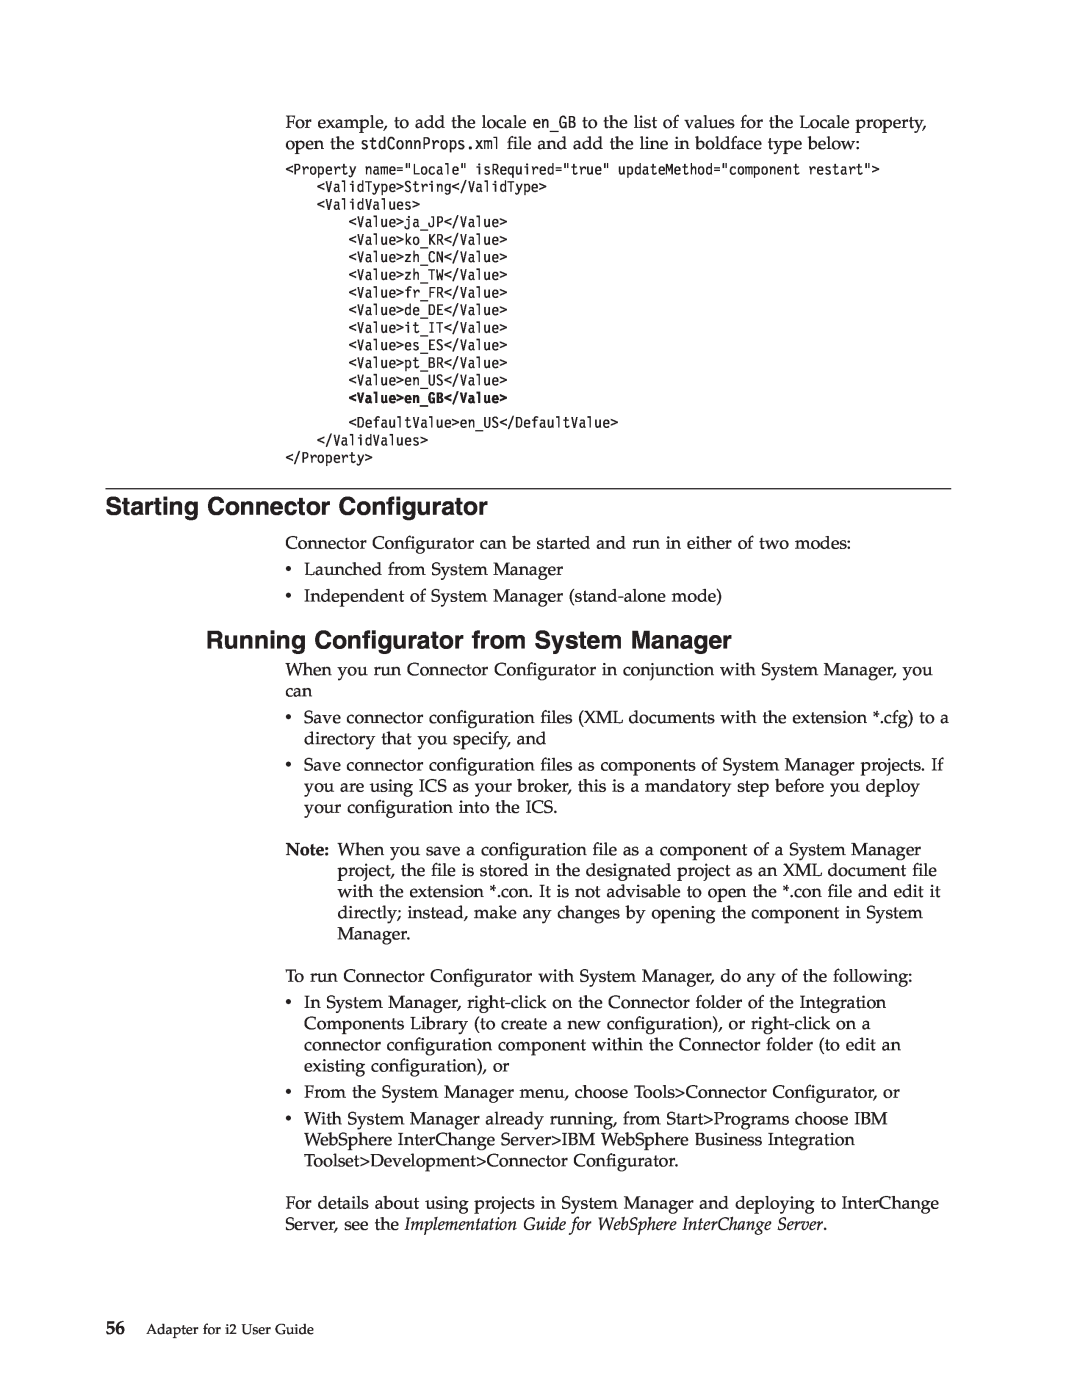 IBM WebSphere Business Integration Adapter manual Starting Connector Configurator, Running Configurator from System Manager 